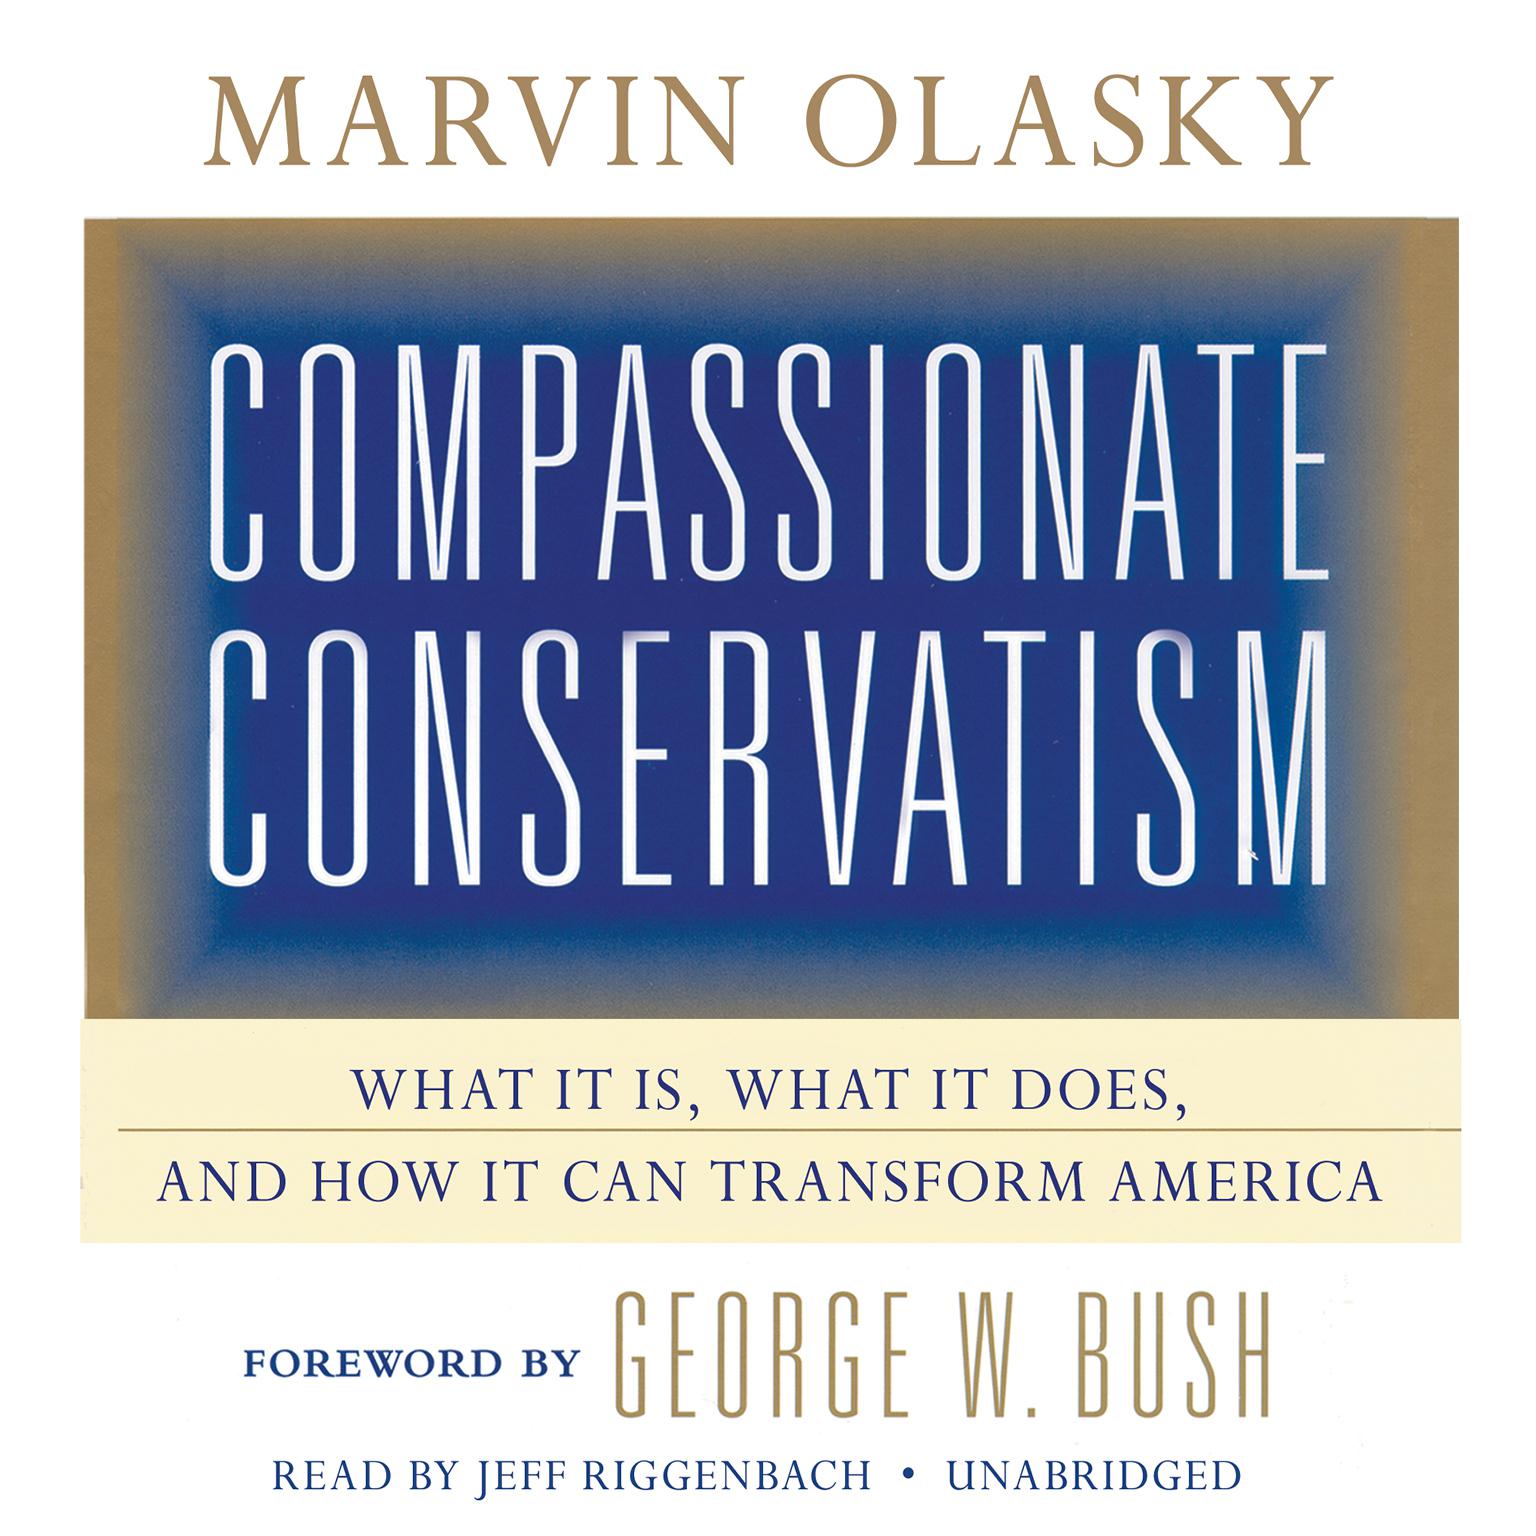 Compassionate Conservatism: What It Is, What It Does, and How It Can Transform America Audiobook, by Marvin Olasky